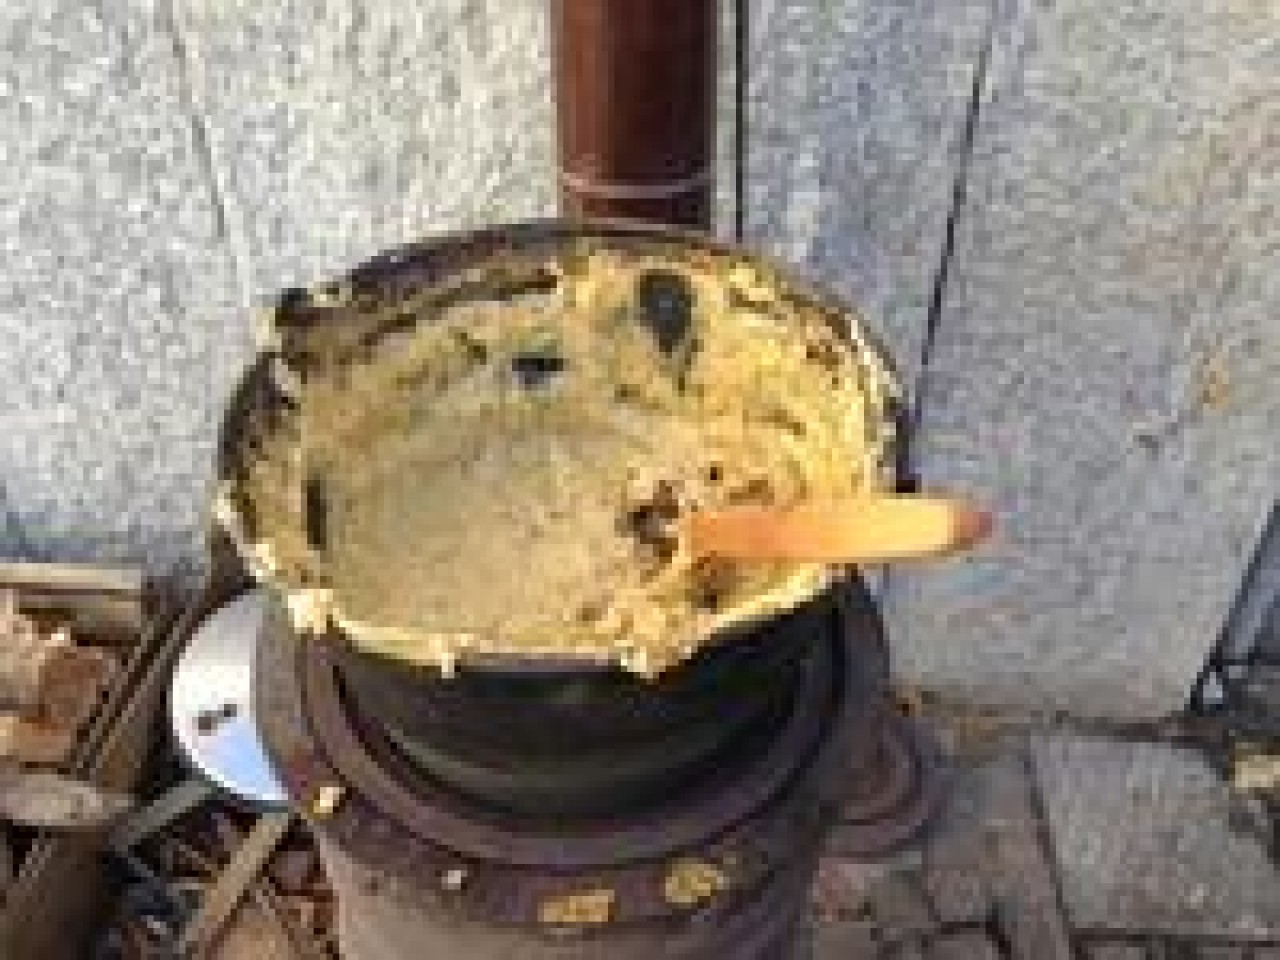 Polenta cooking in the streets of Aosta